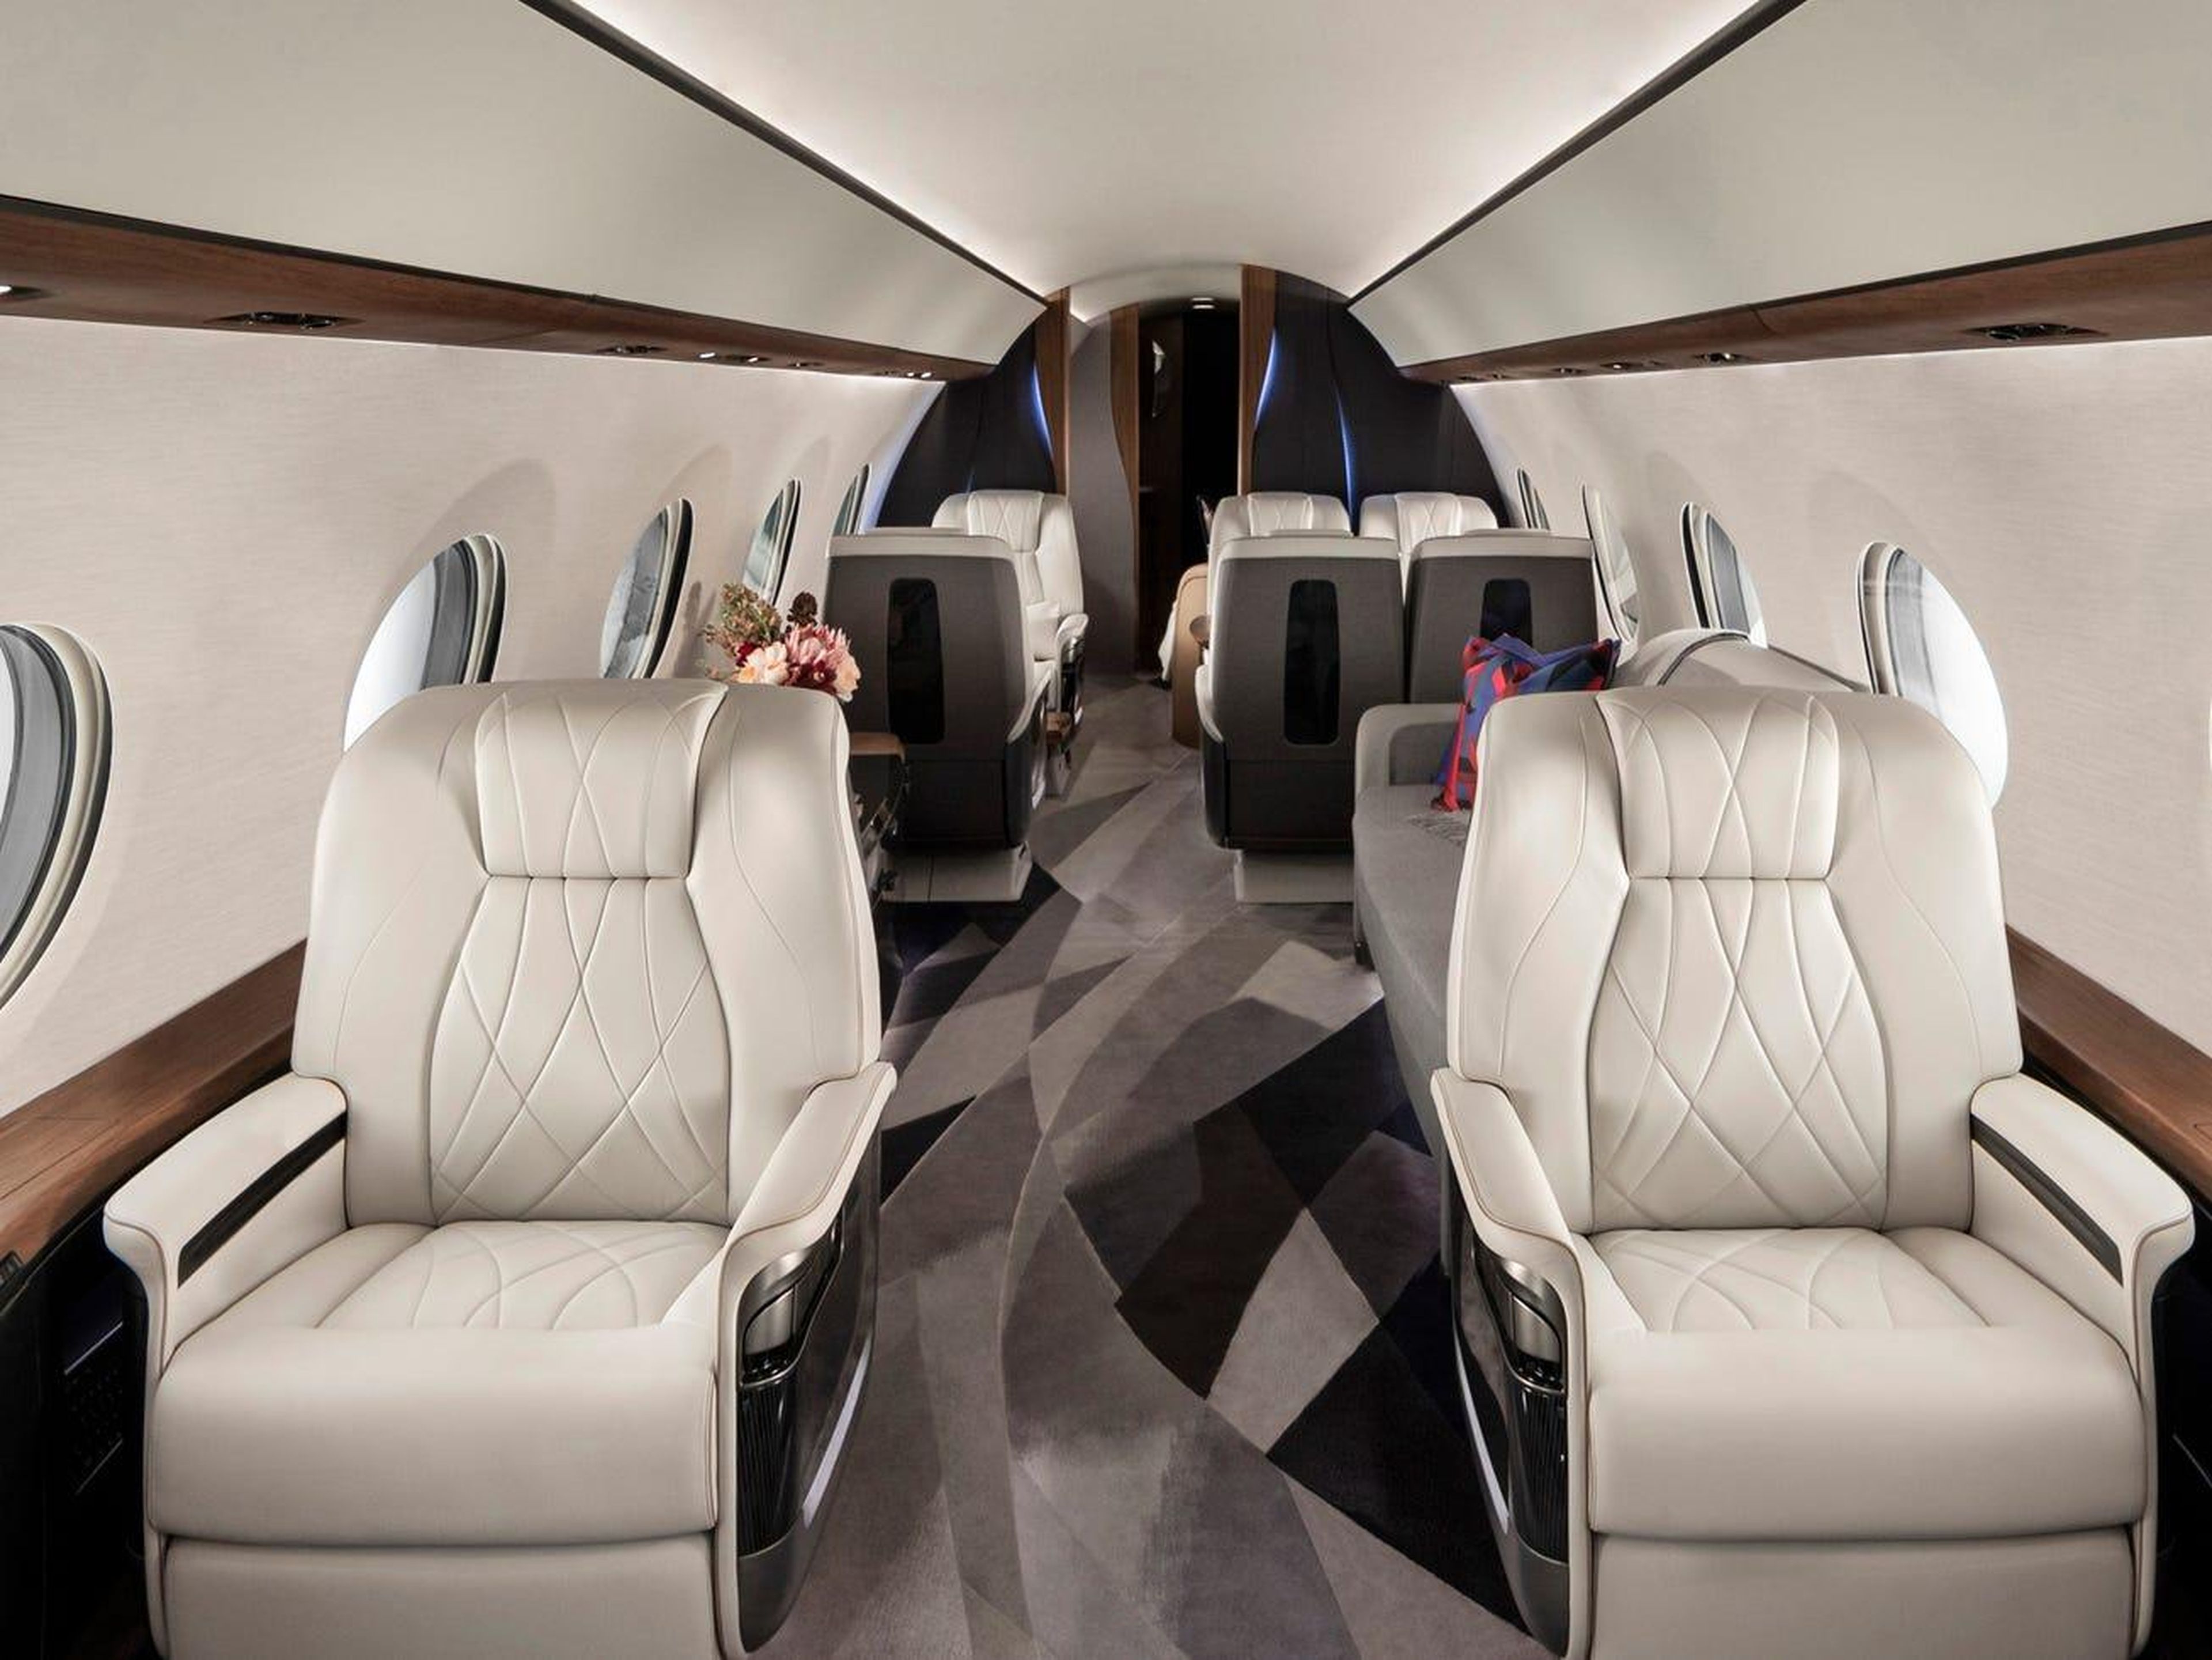 The new Gulfstream flagship also bests the Global 7500 in width and height by inches. The G700 comes in at six feet and three inches tall and eight feet and two inches wide.